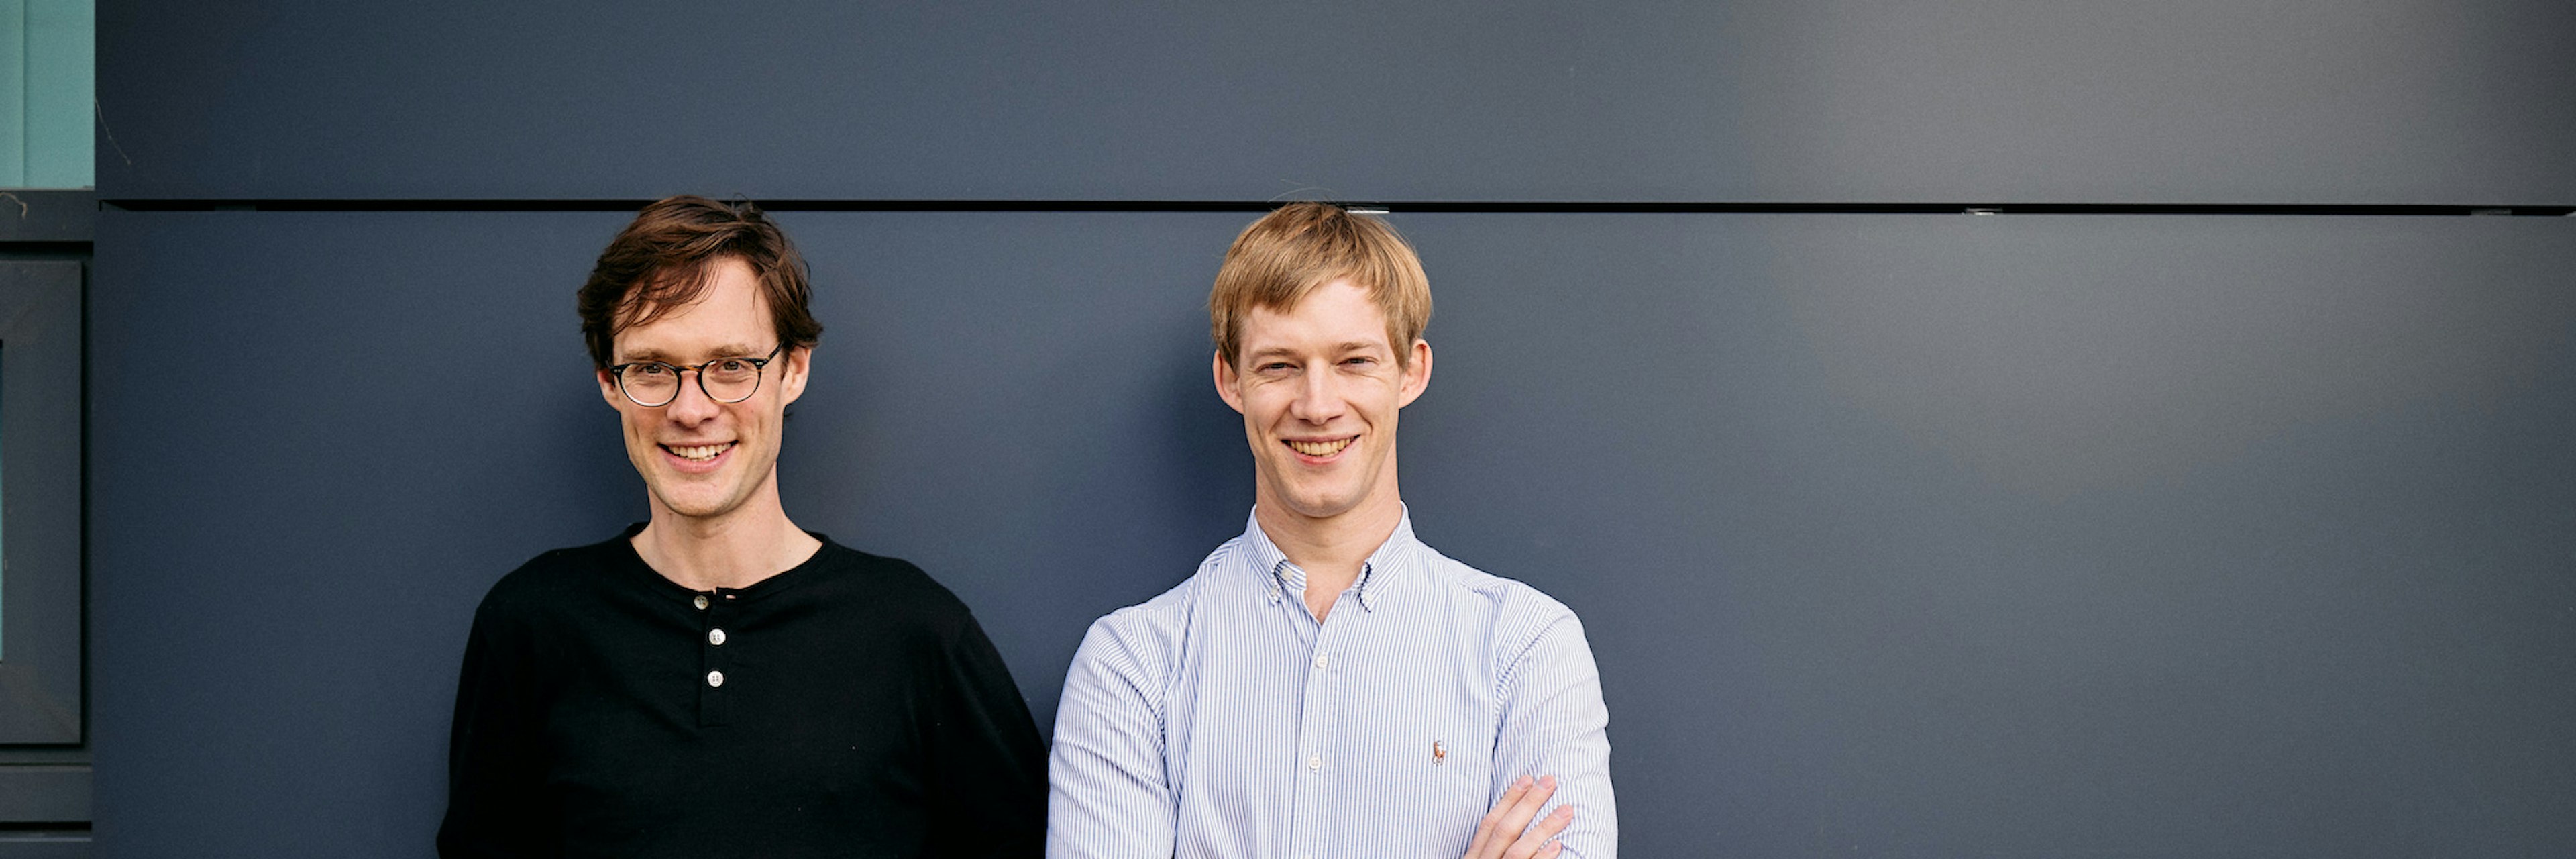 Oxford Ionics founders Tom Harty and Chris Ballance